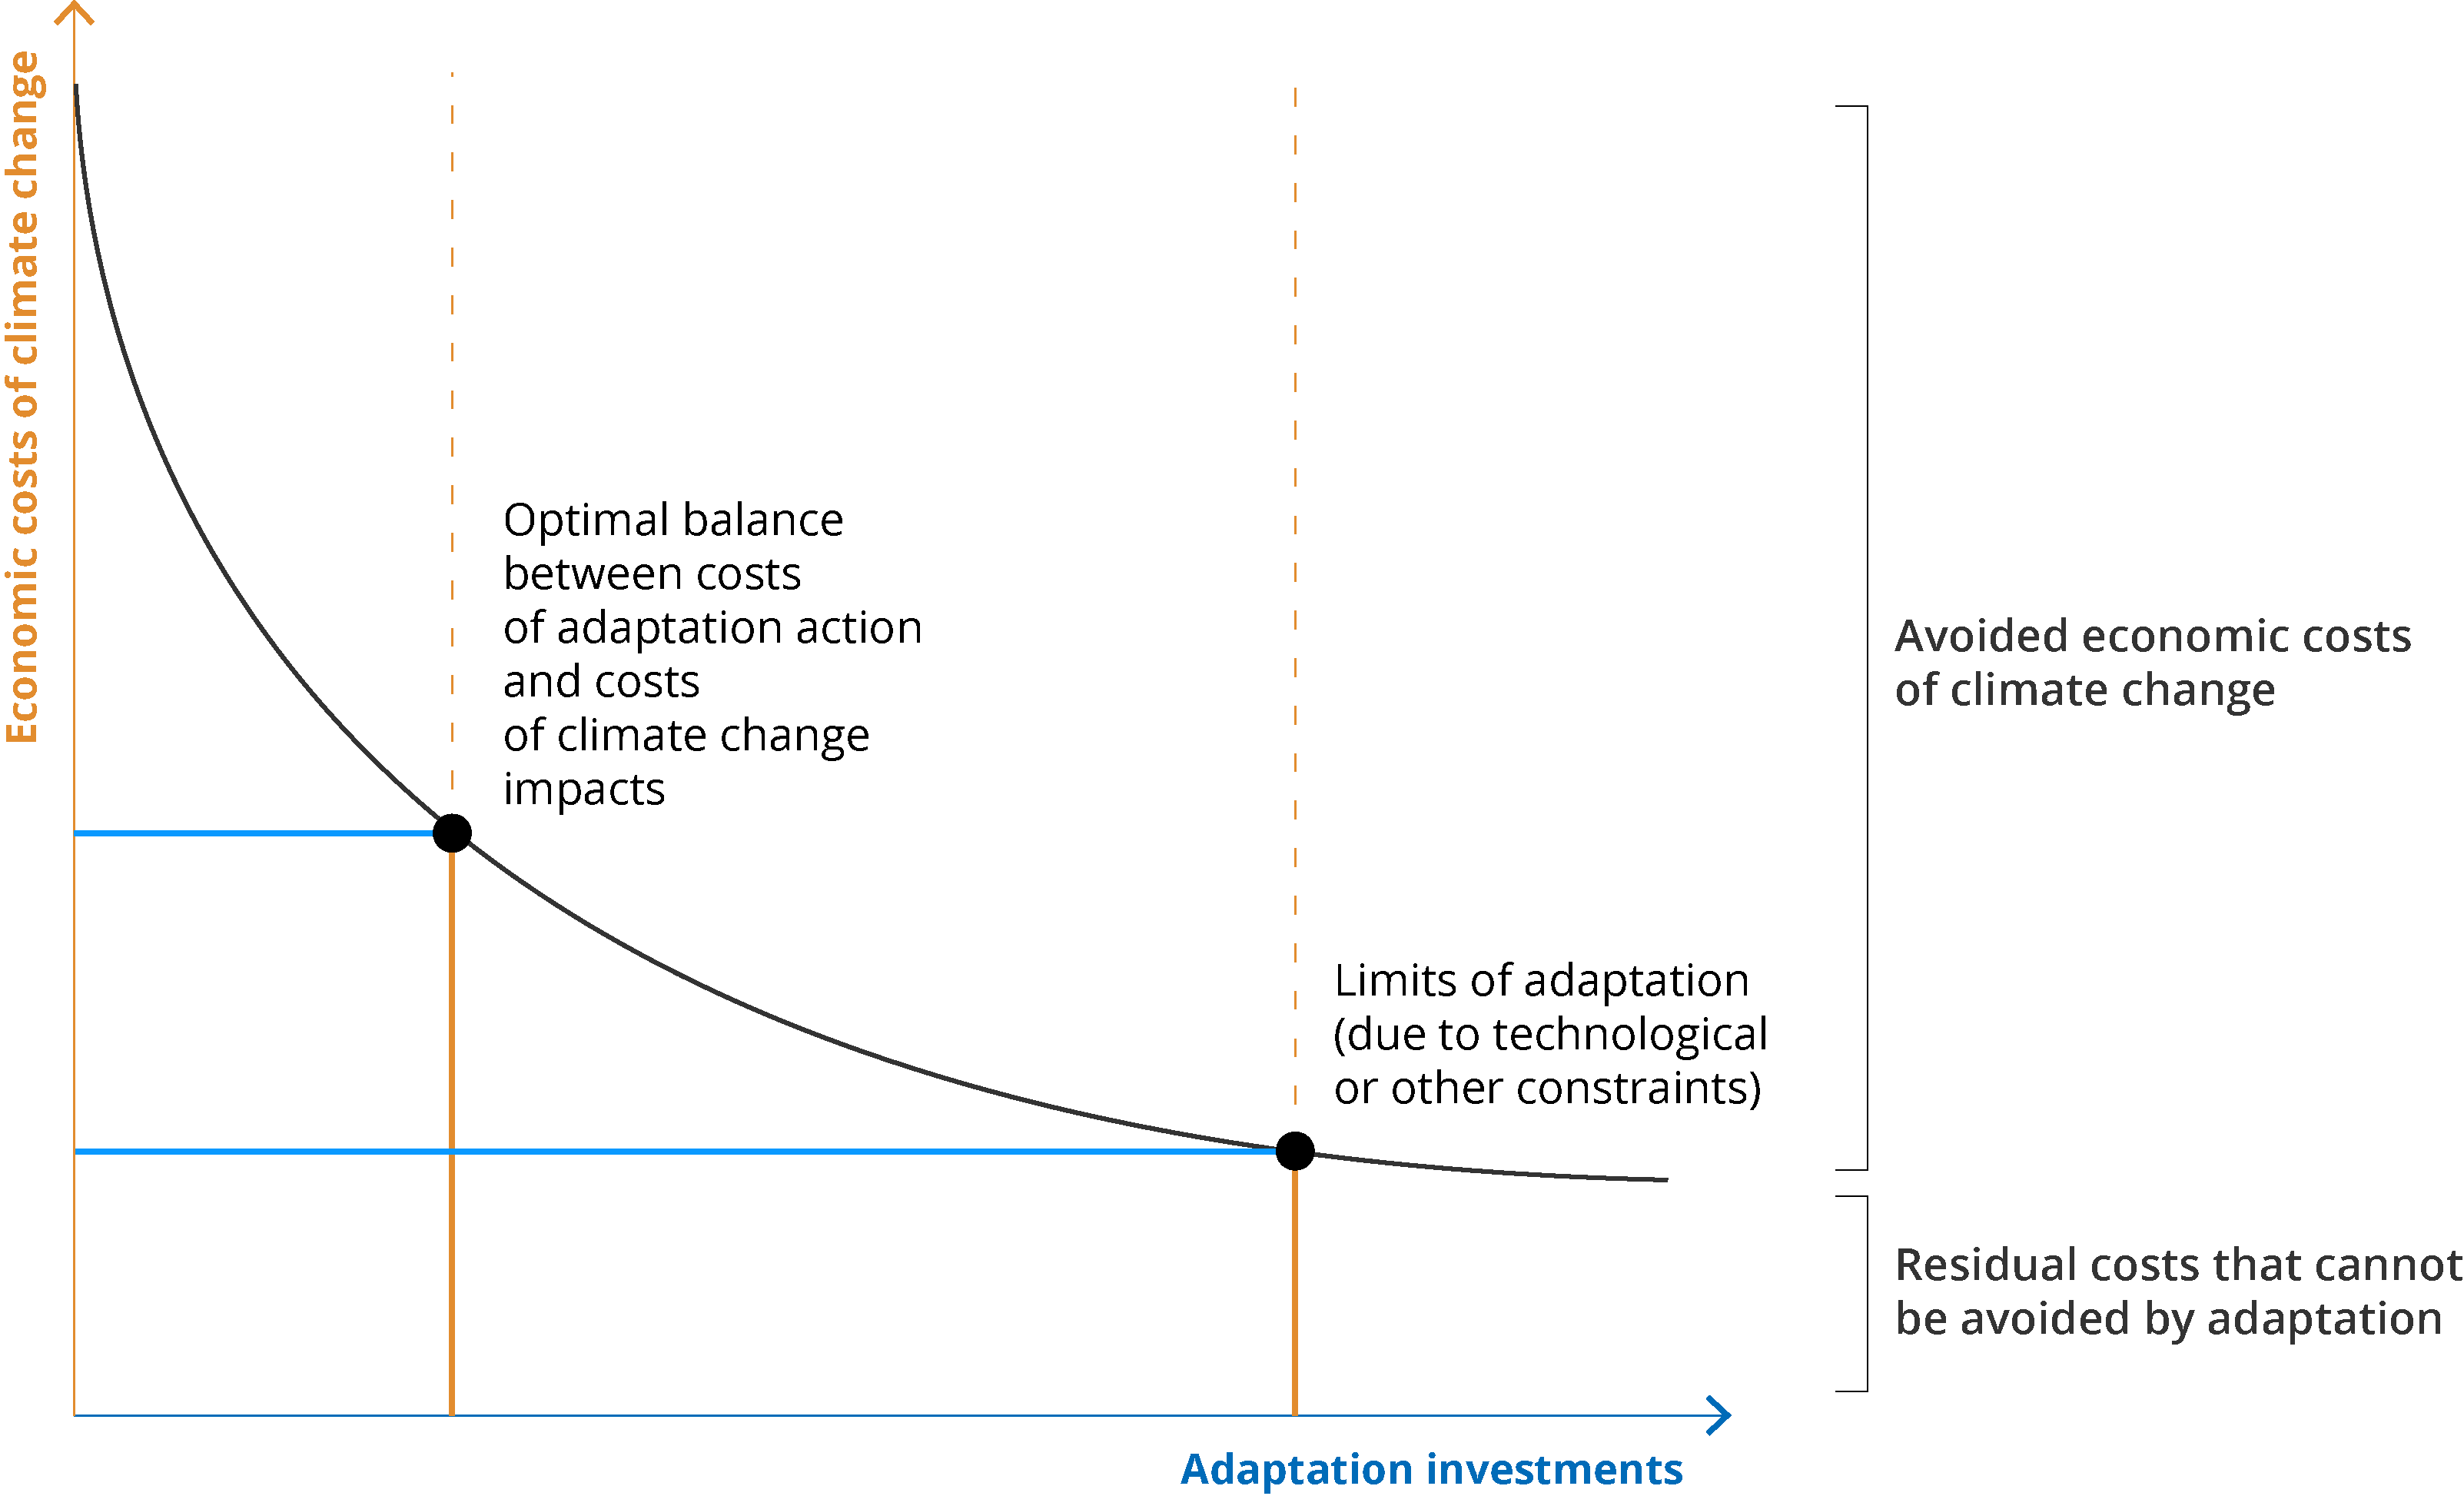 Link between adaptation investments and the economic costs of climate change